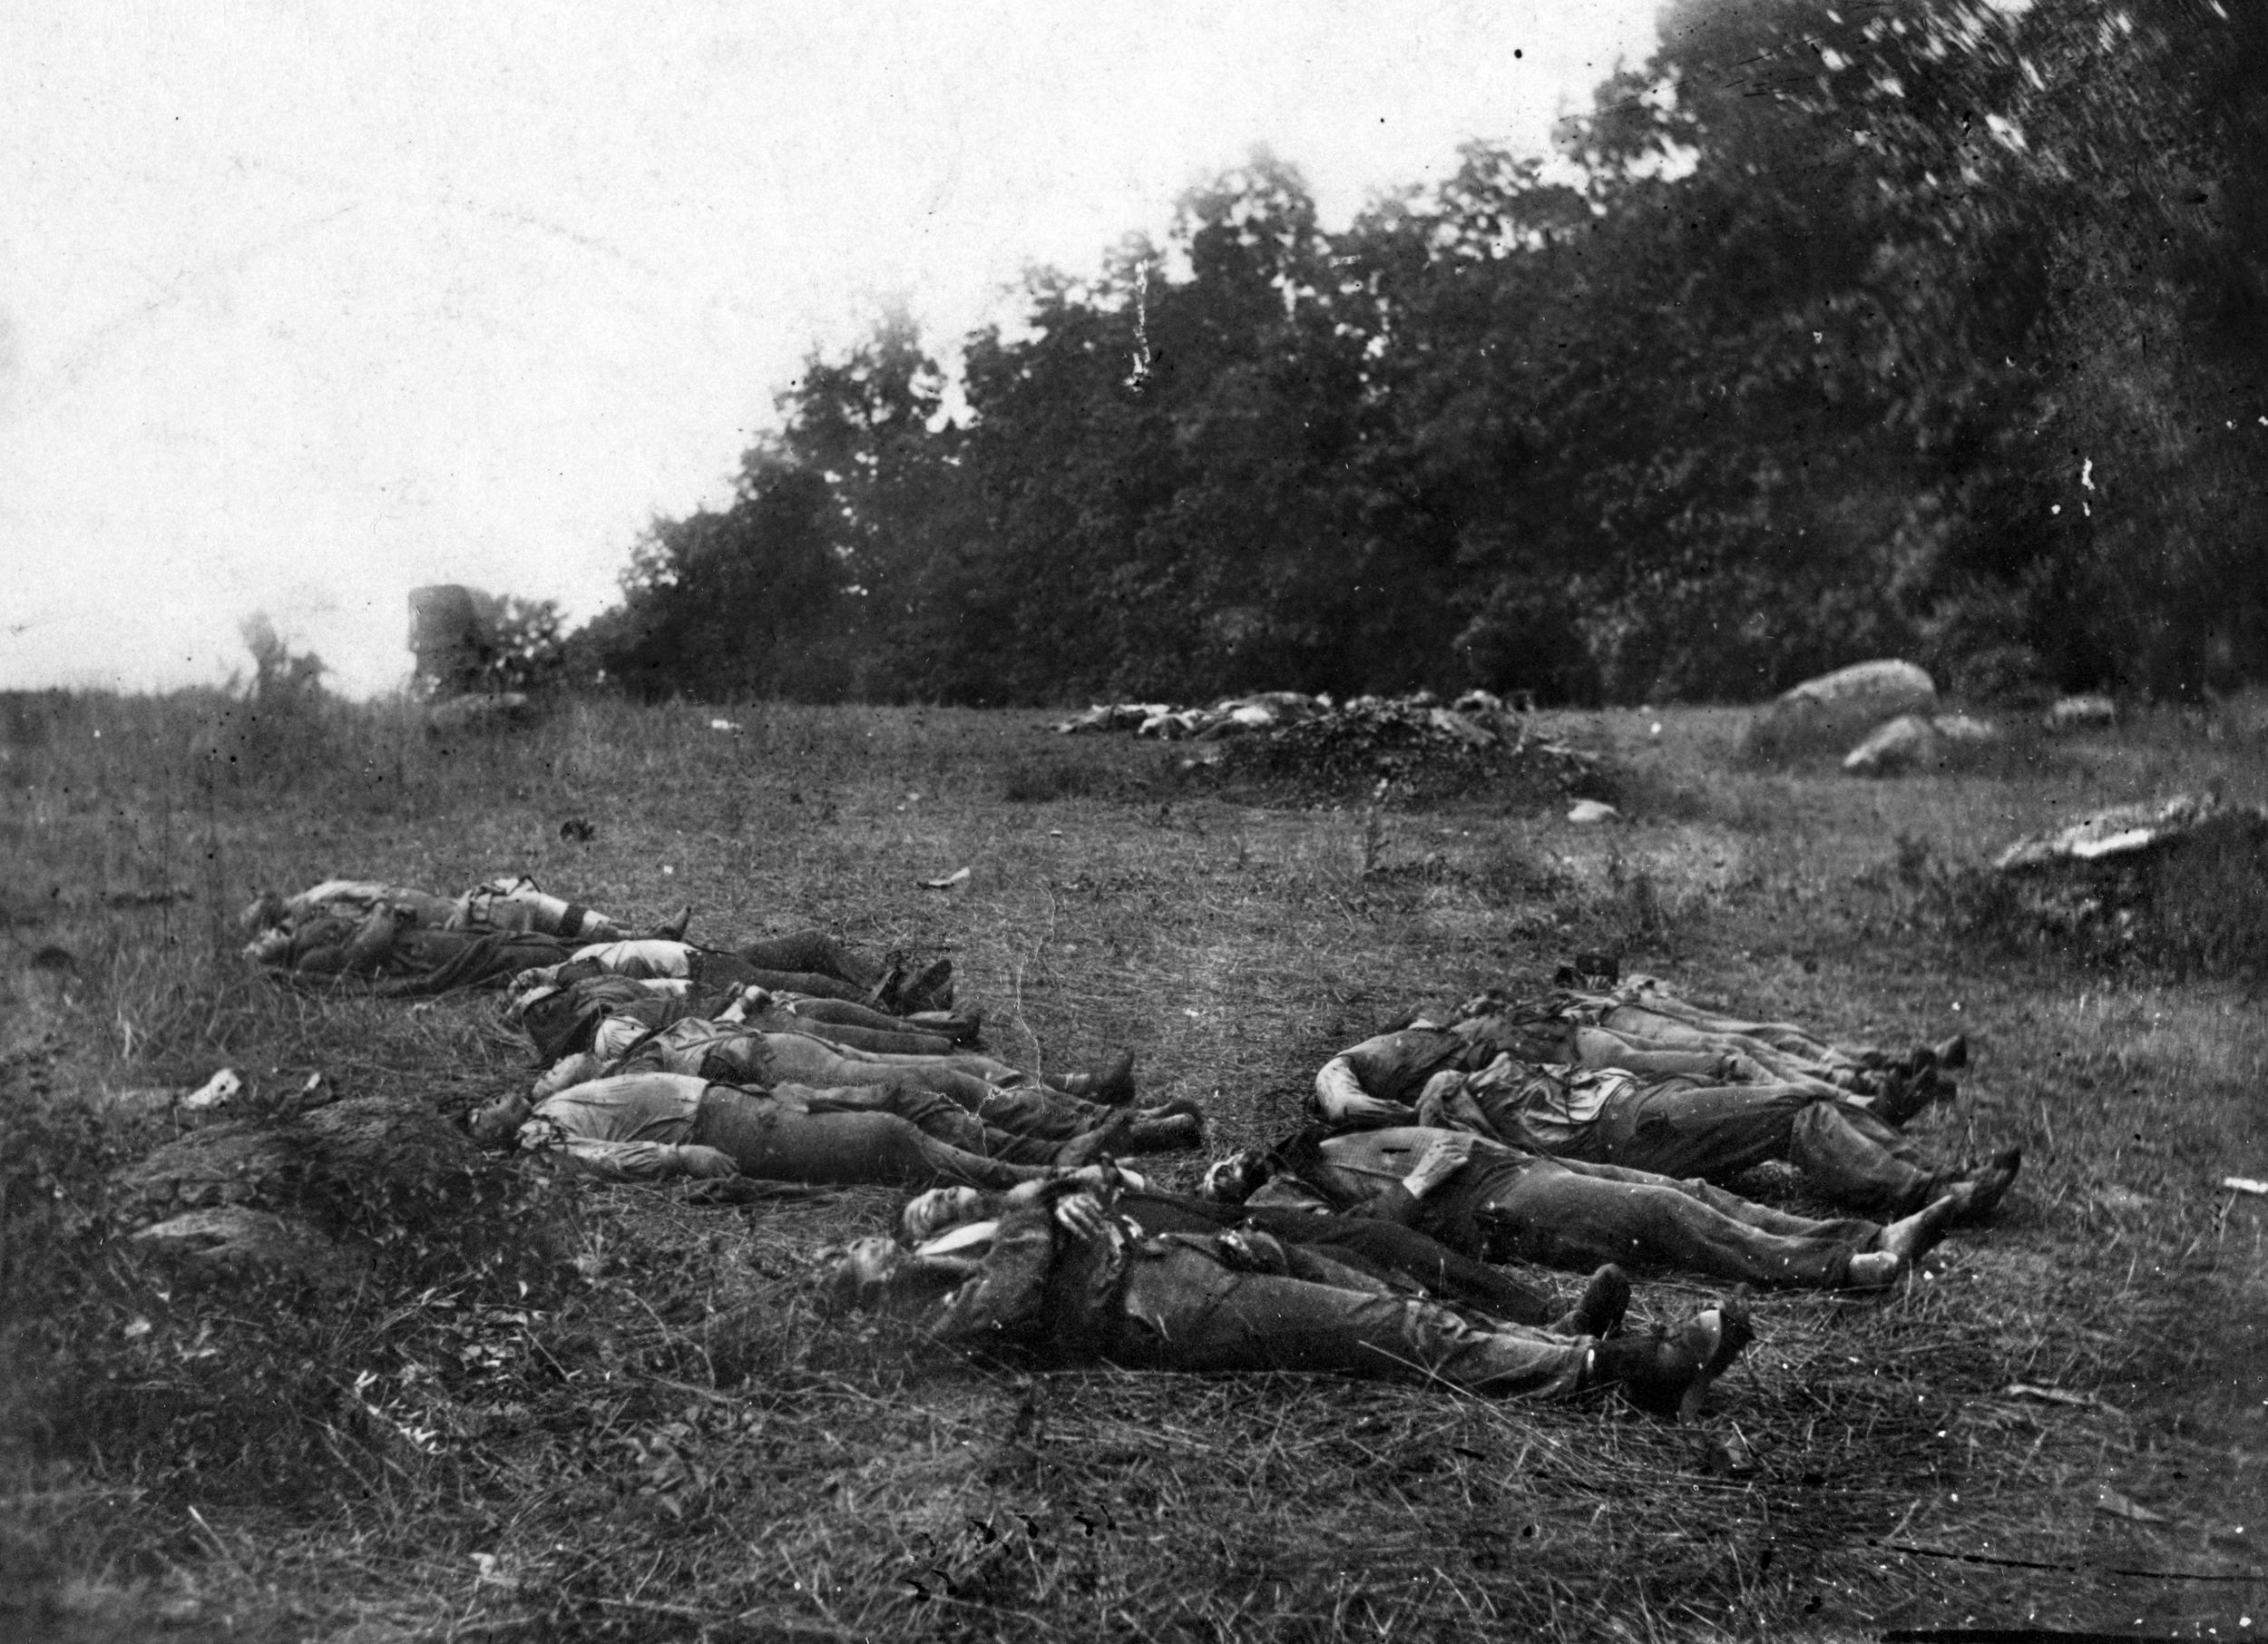 Photographer Alexander Gardner arrived in Gettysburg shortly after the battle was over and captured a number of photographs of the dead, including this image of soldiers gathered for burial in the Wheatfield.